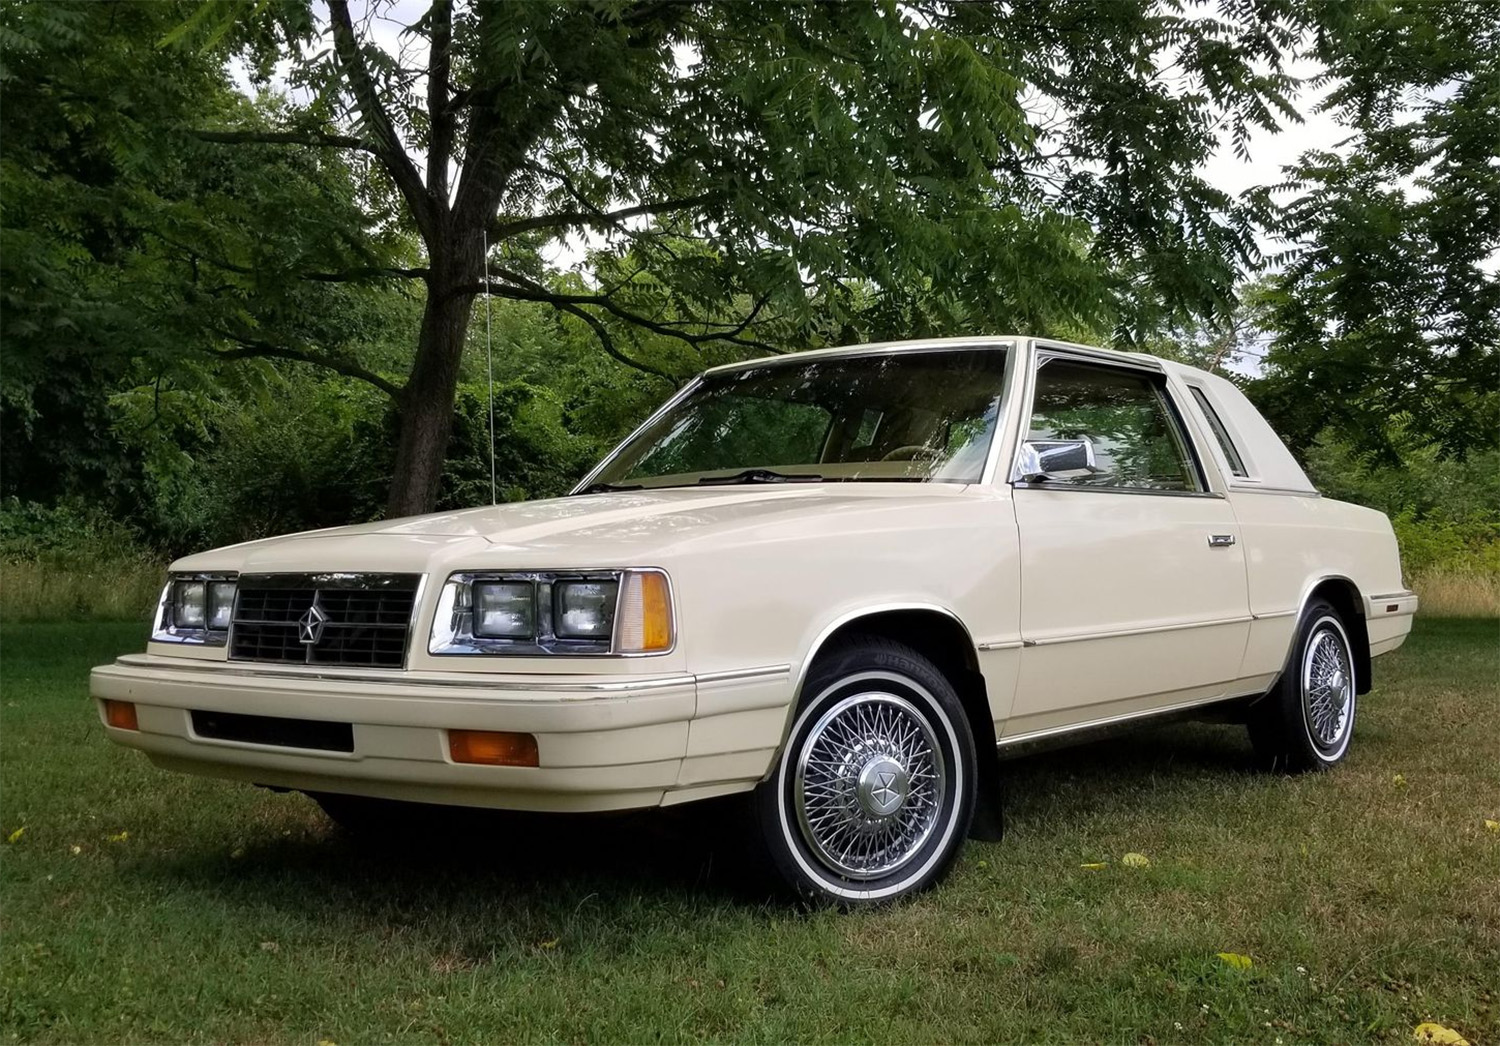 Front 3/4 of beige 1986 Dodge 600 Coupe , the Cheapest Cars and Bids Auction record holder